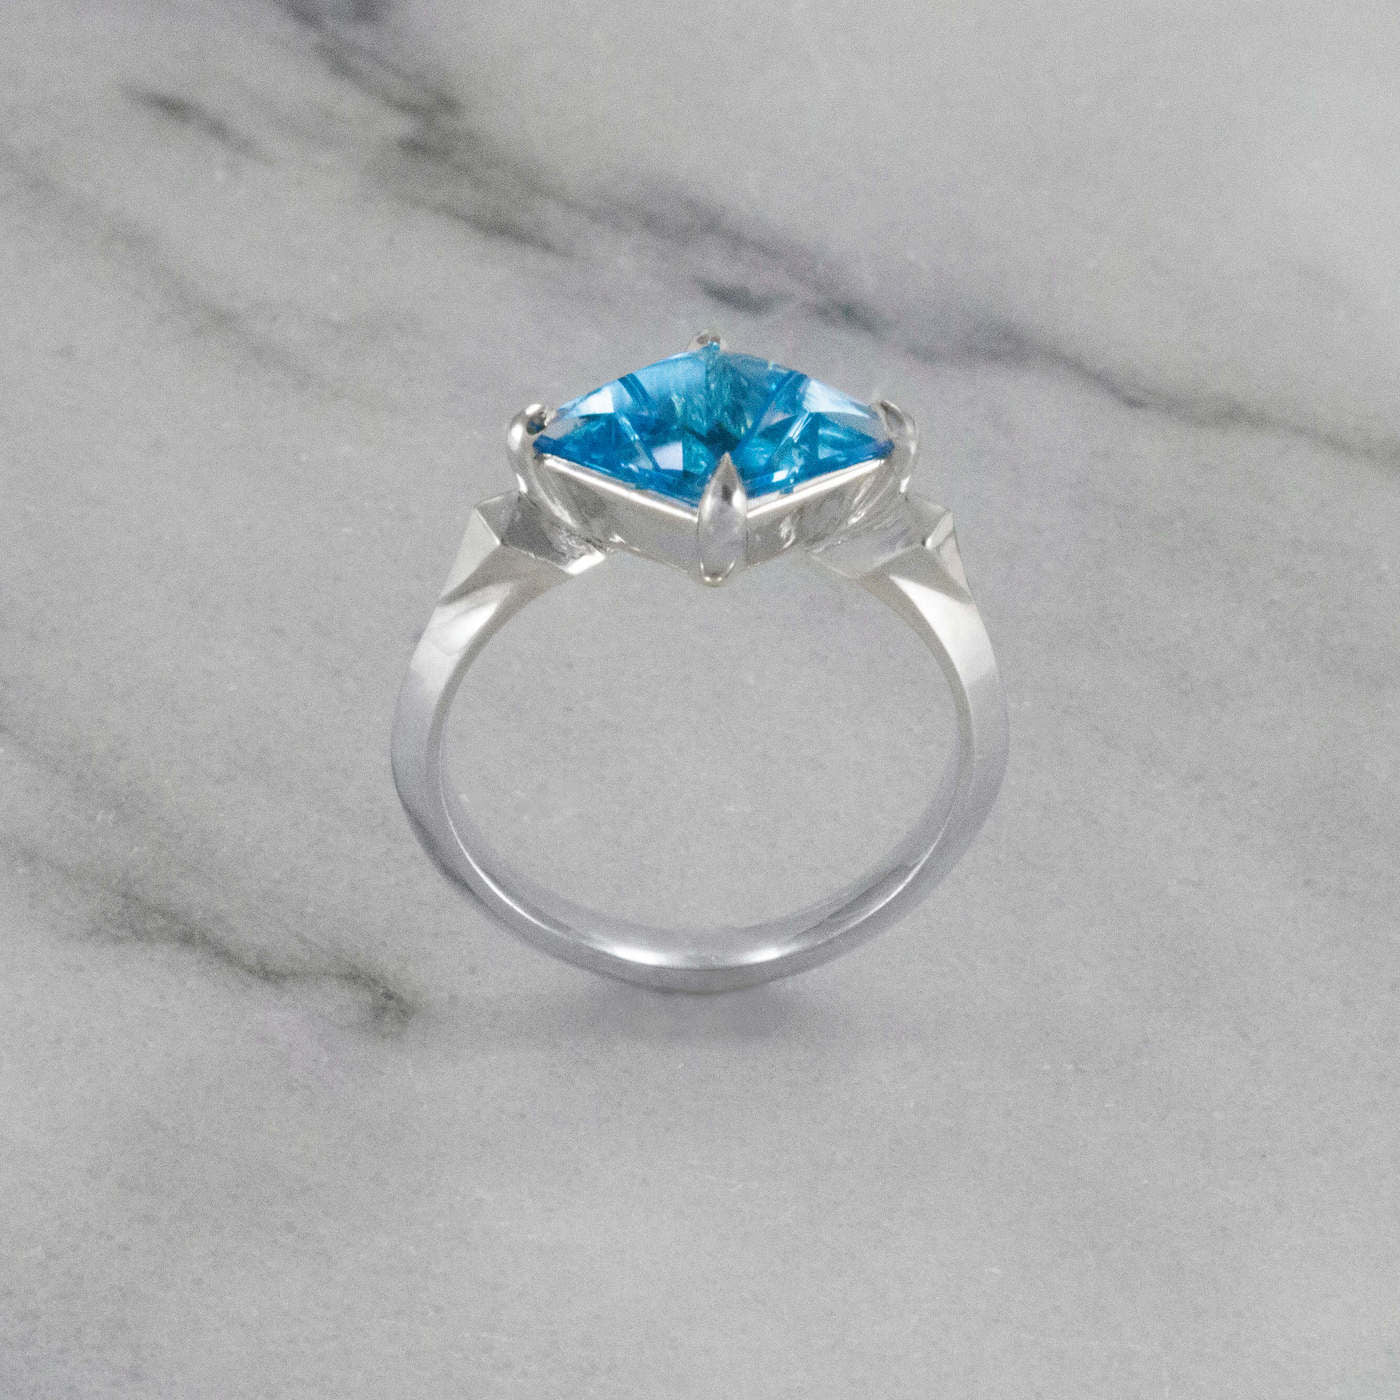 Kite Shaped Blue Topaz Pyramid Ring front view